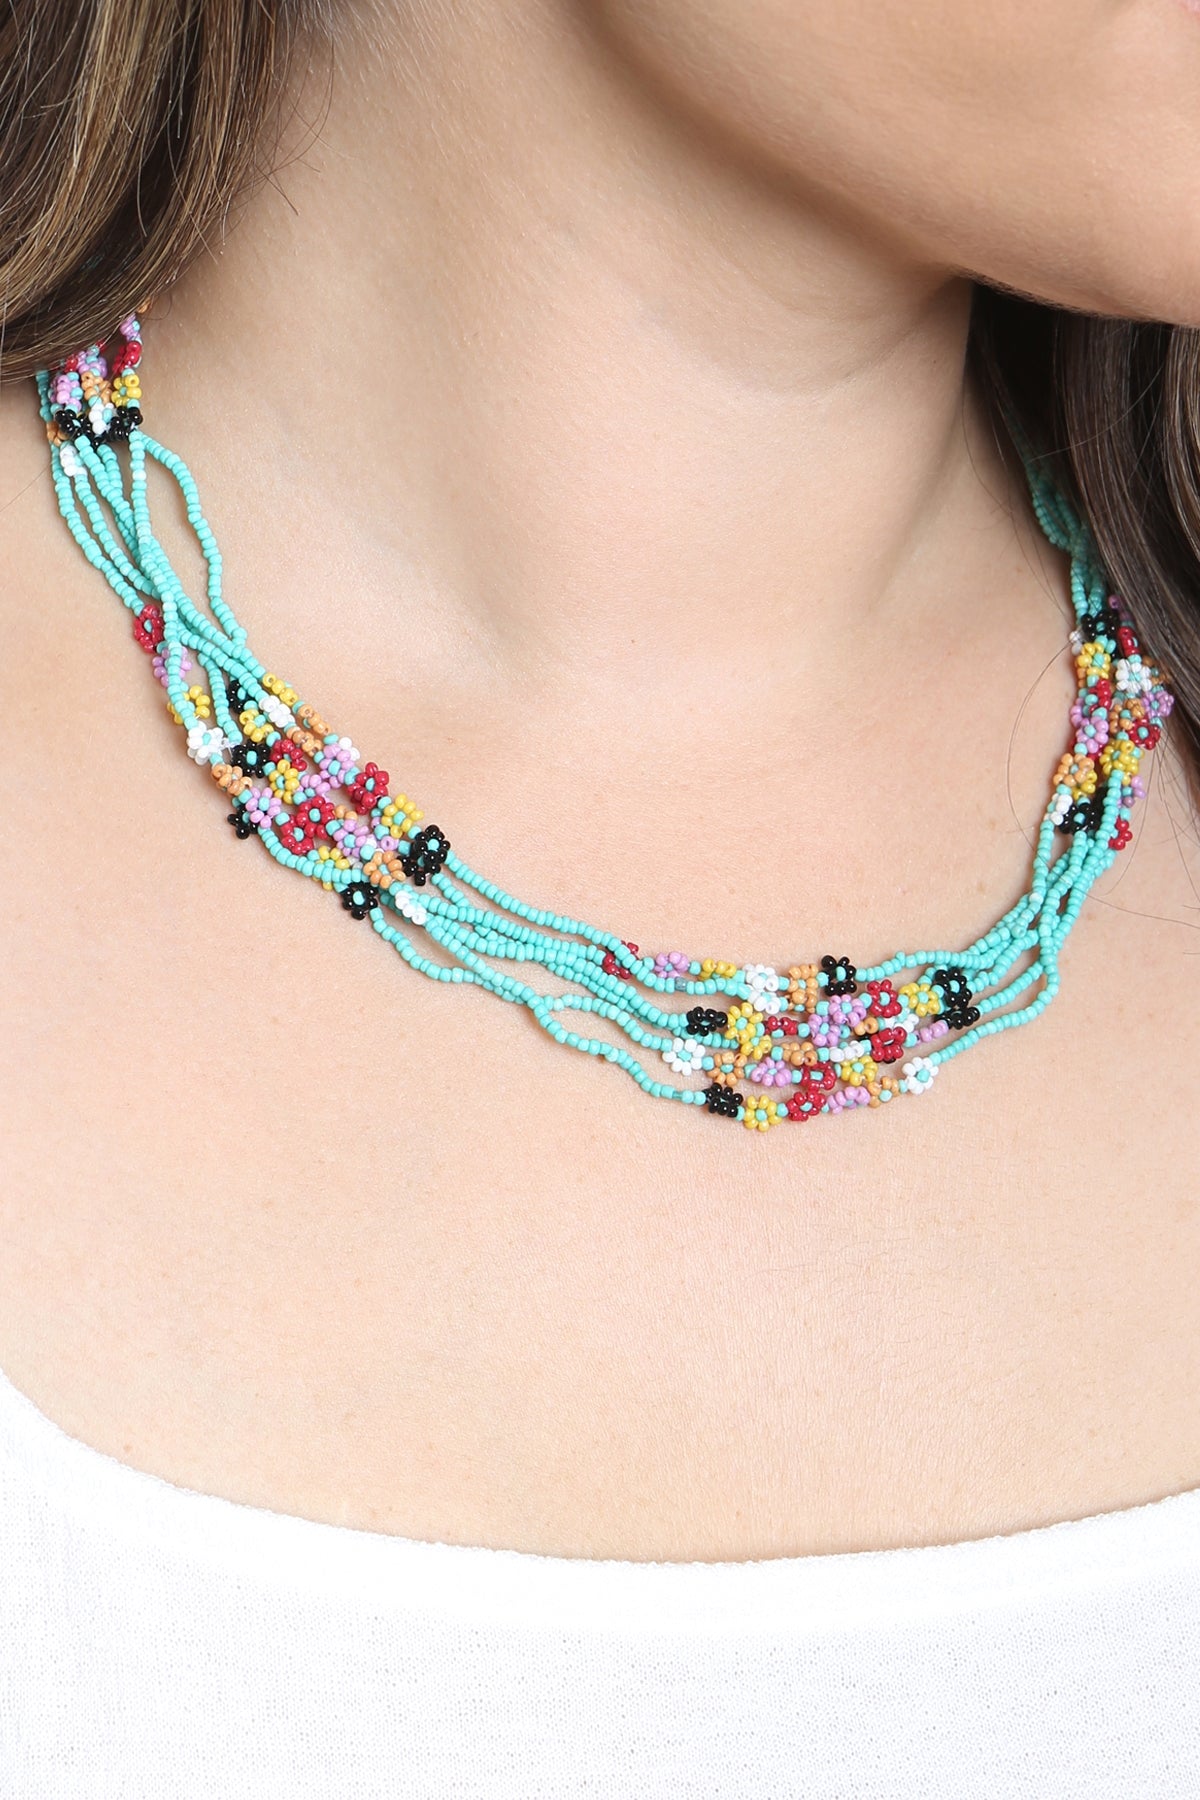 SEED BEADS MULTI LAYERED FLOWER STATIONARY NECKLACE